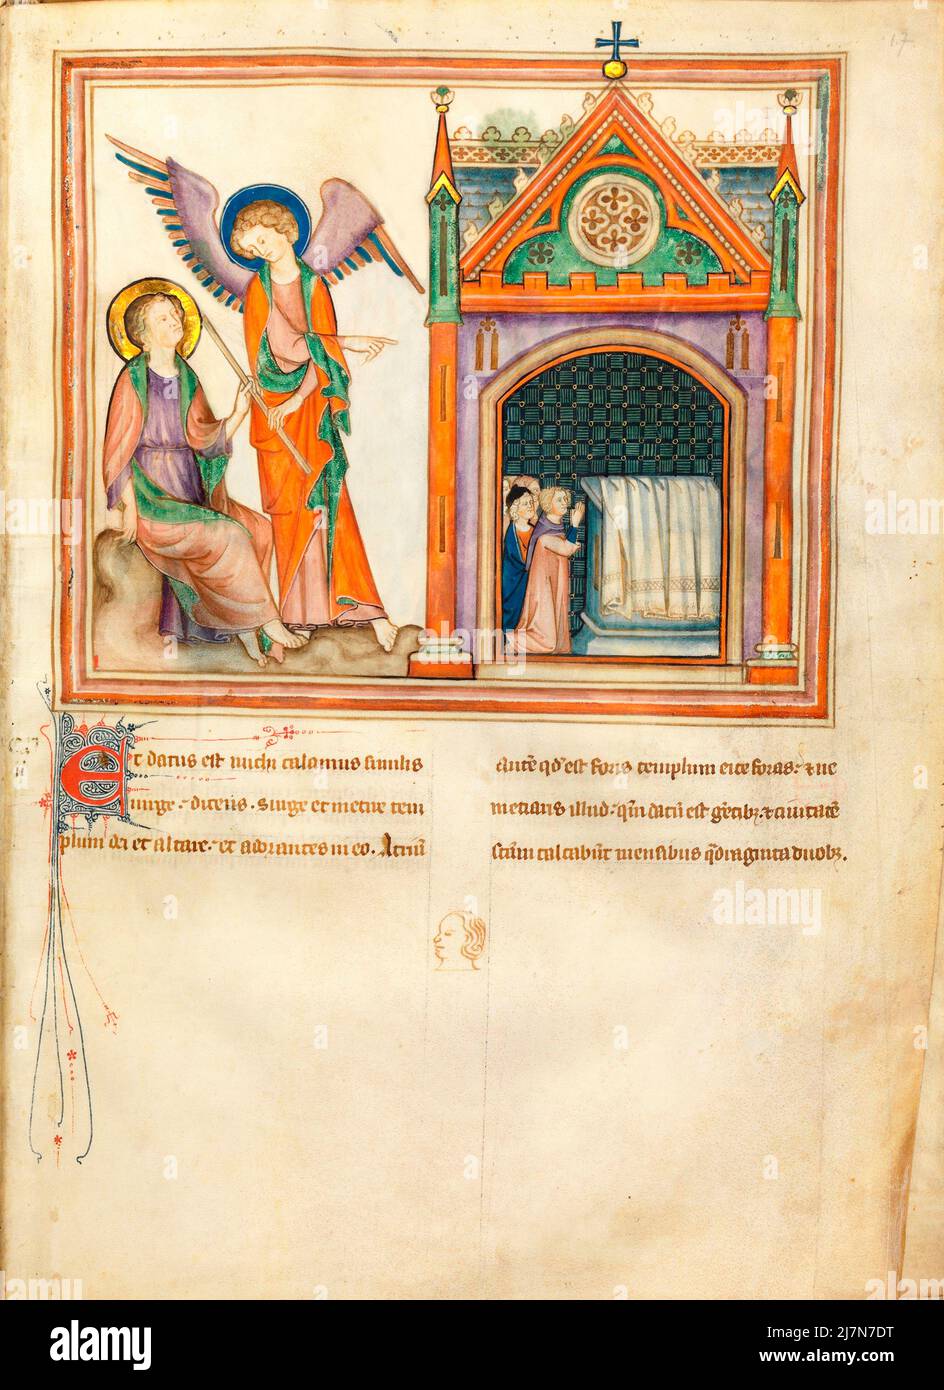 The Cloisters Apocalypse ca. 1330  - The Apocalypse, or Book of Revelation,  John the Evangelist , giovanni evangelista, during his exile on the Greek island of Patmos. In this Image-  The Two Witnesses  The Measuring of the Temple  The Measuring of the Temple Stock Photo